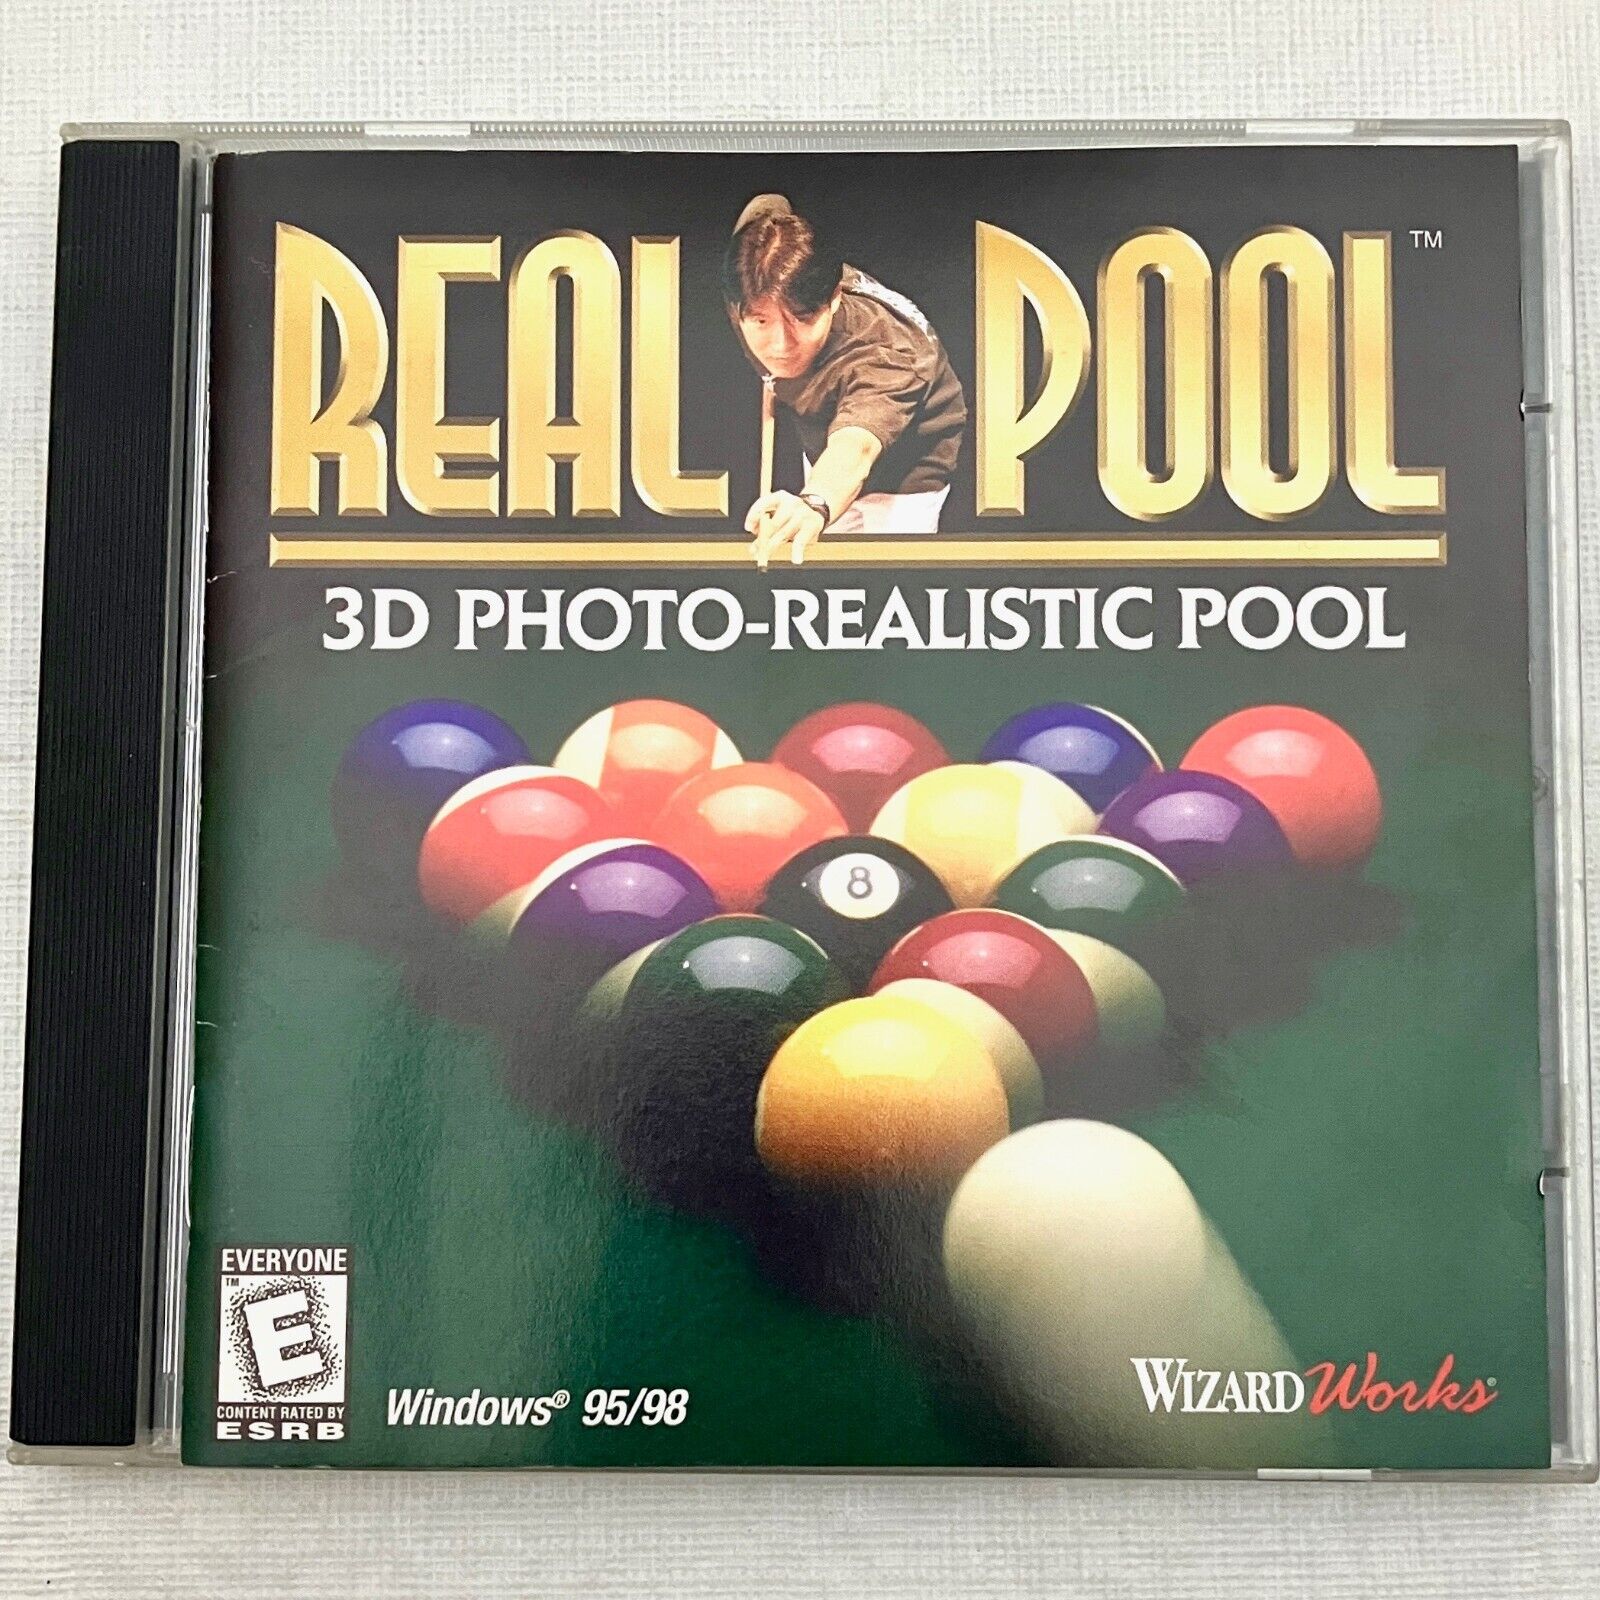 Real Pool Vintage PC Game for Win 95/98 c.1998 from WizardWorks